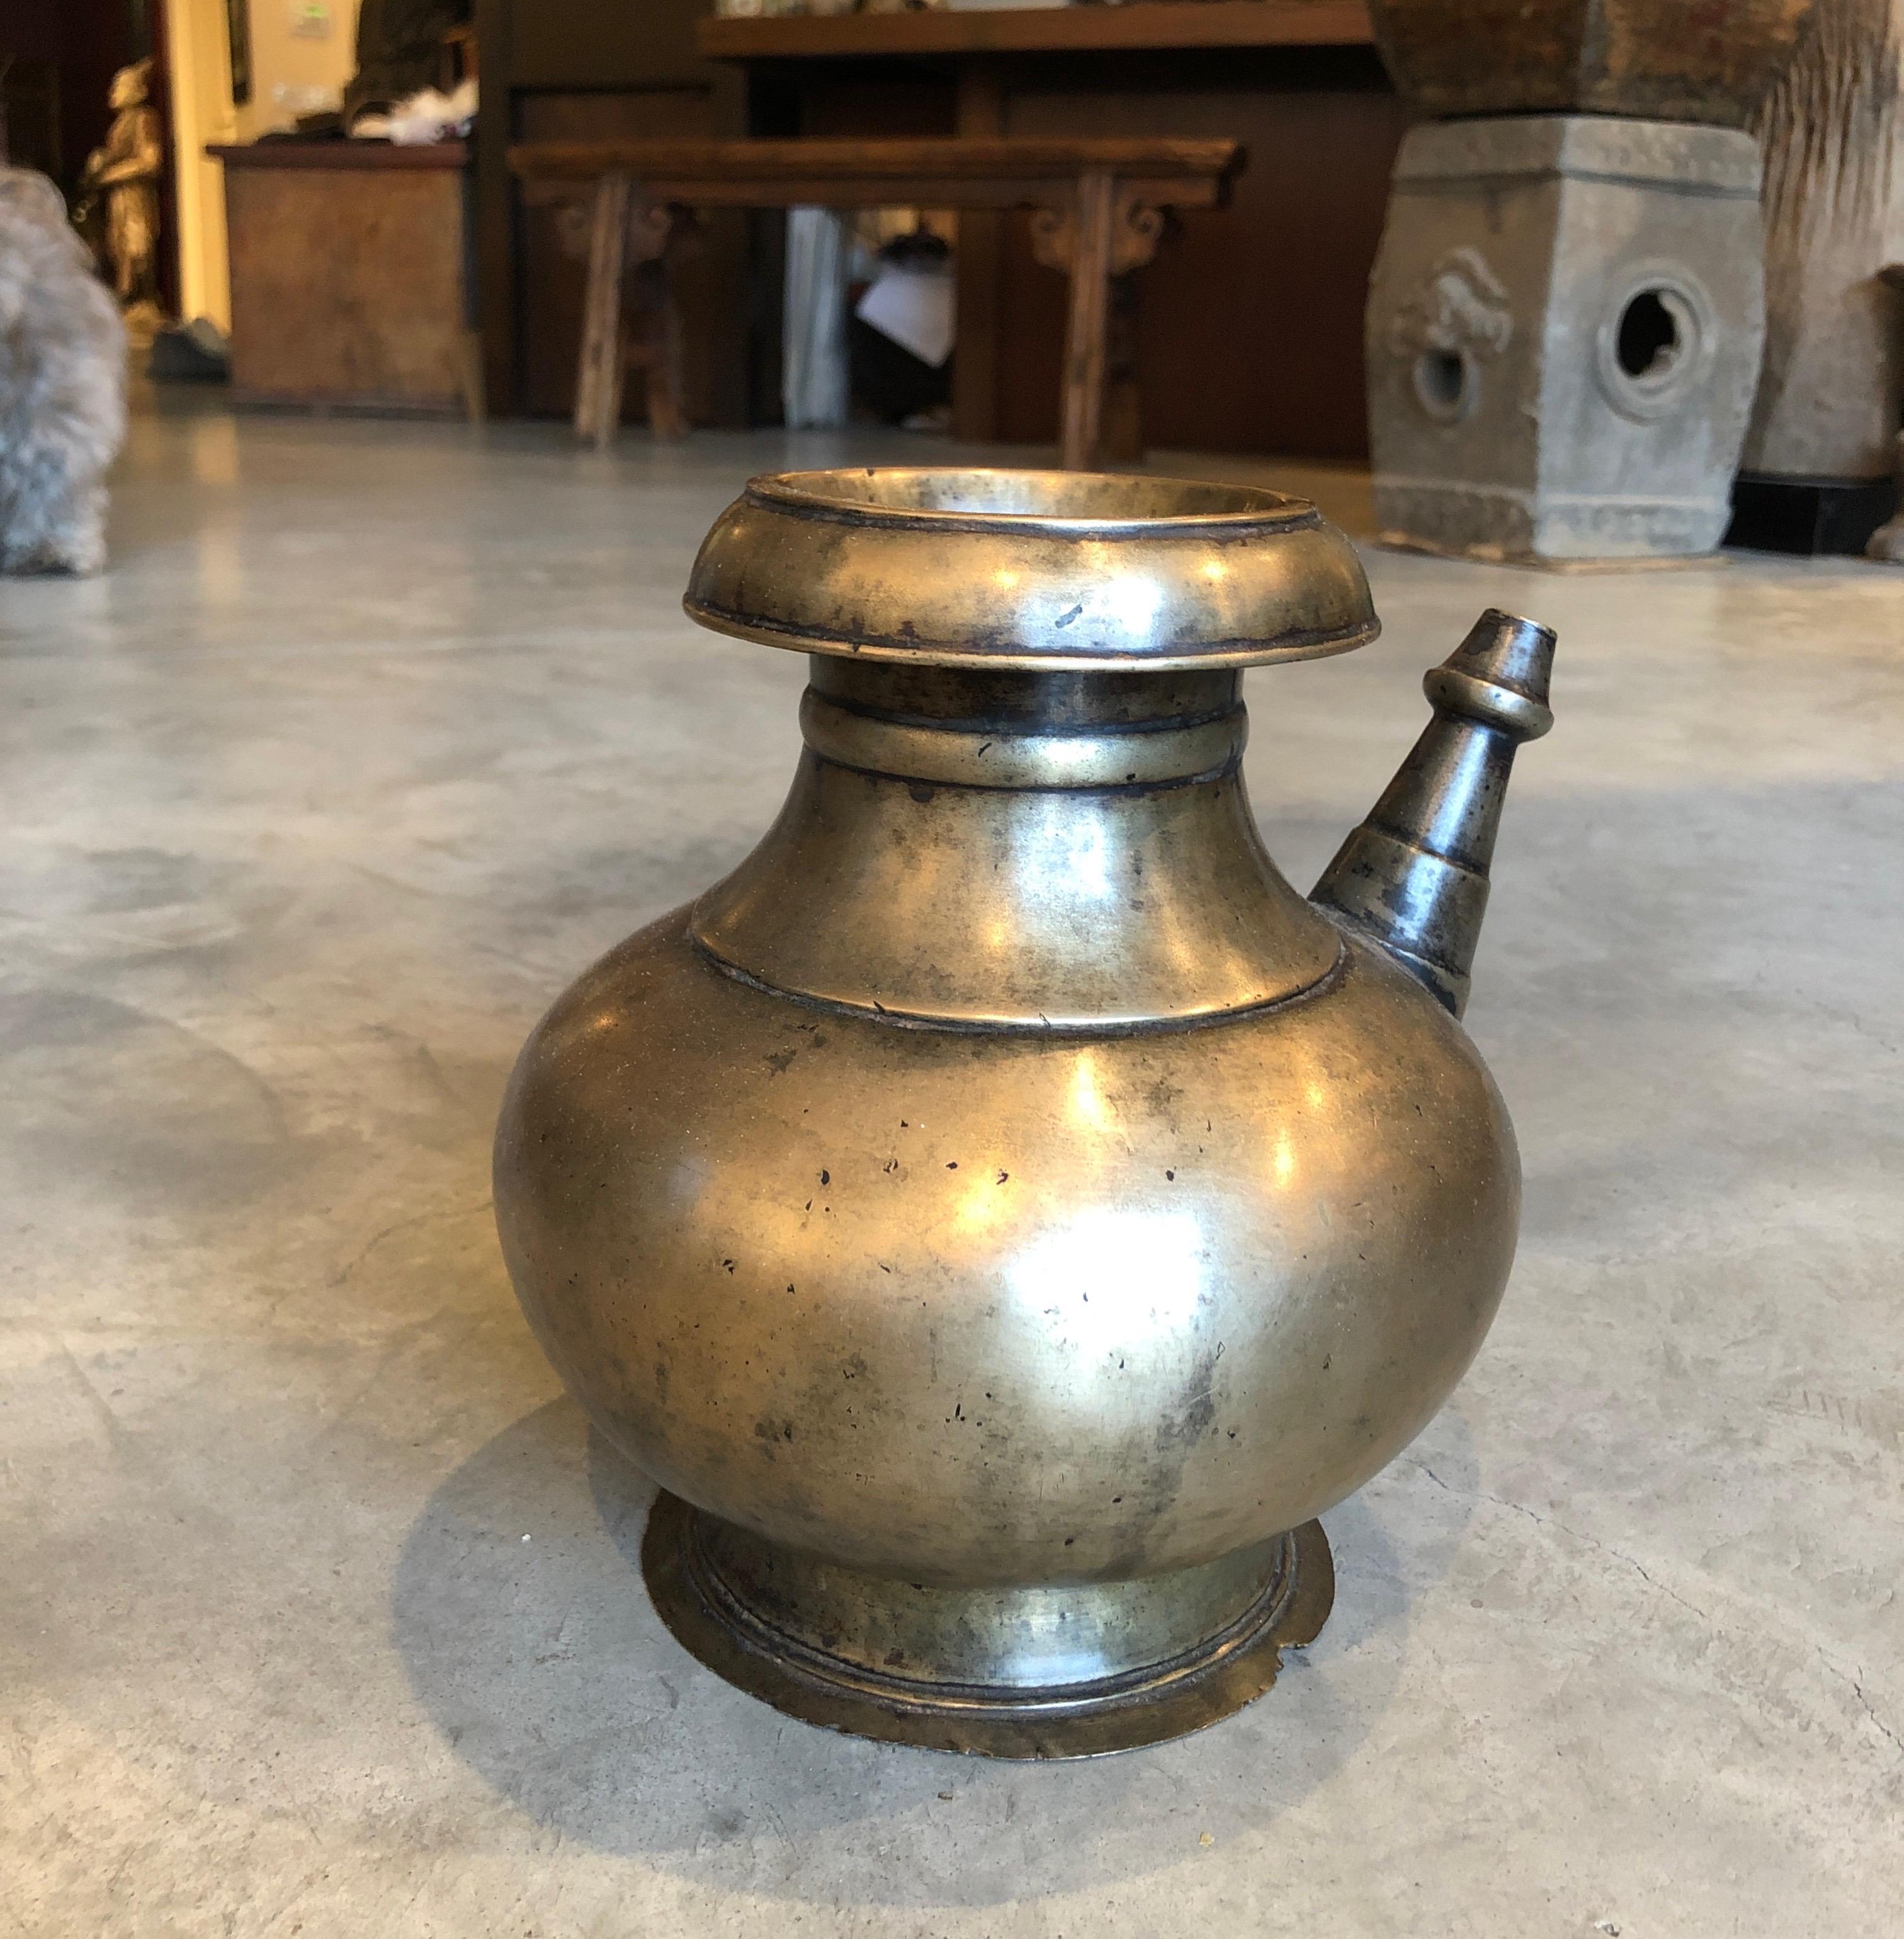 A beautifully cast and unusually tall, large and heavy mid-19th Century bronze ceremonial holy water decanter from Nepal. This truly graceful design features a gorgeous patina, emphasizing it's many years of use in a Buddhist temple. This is a